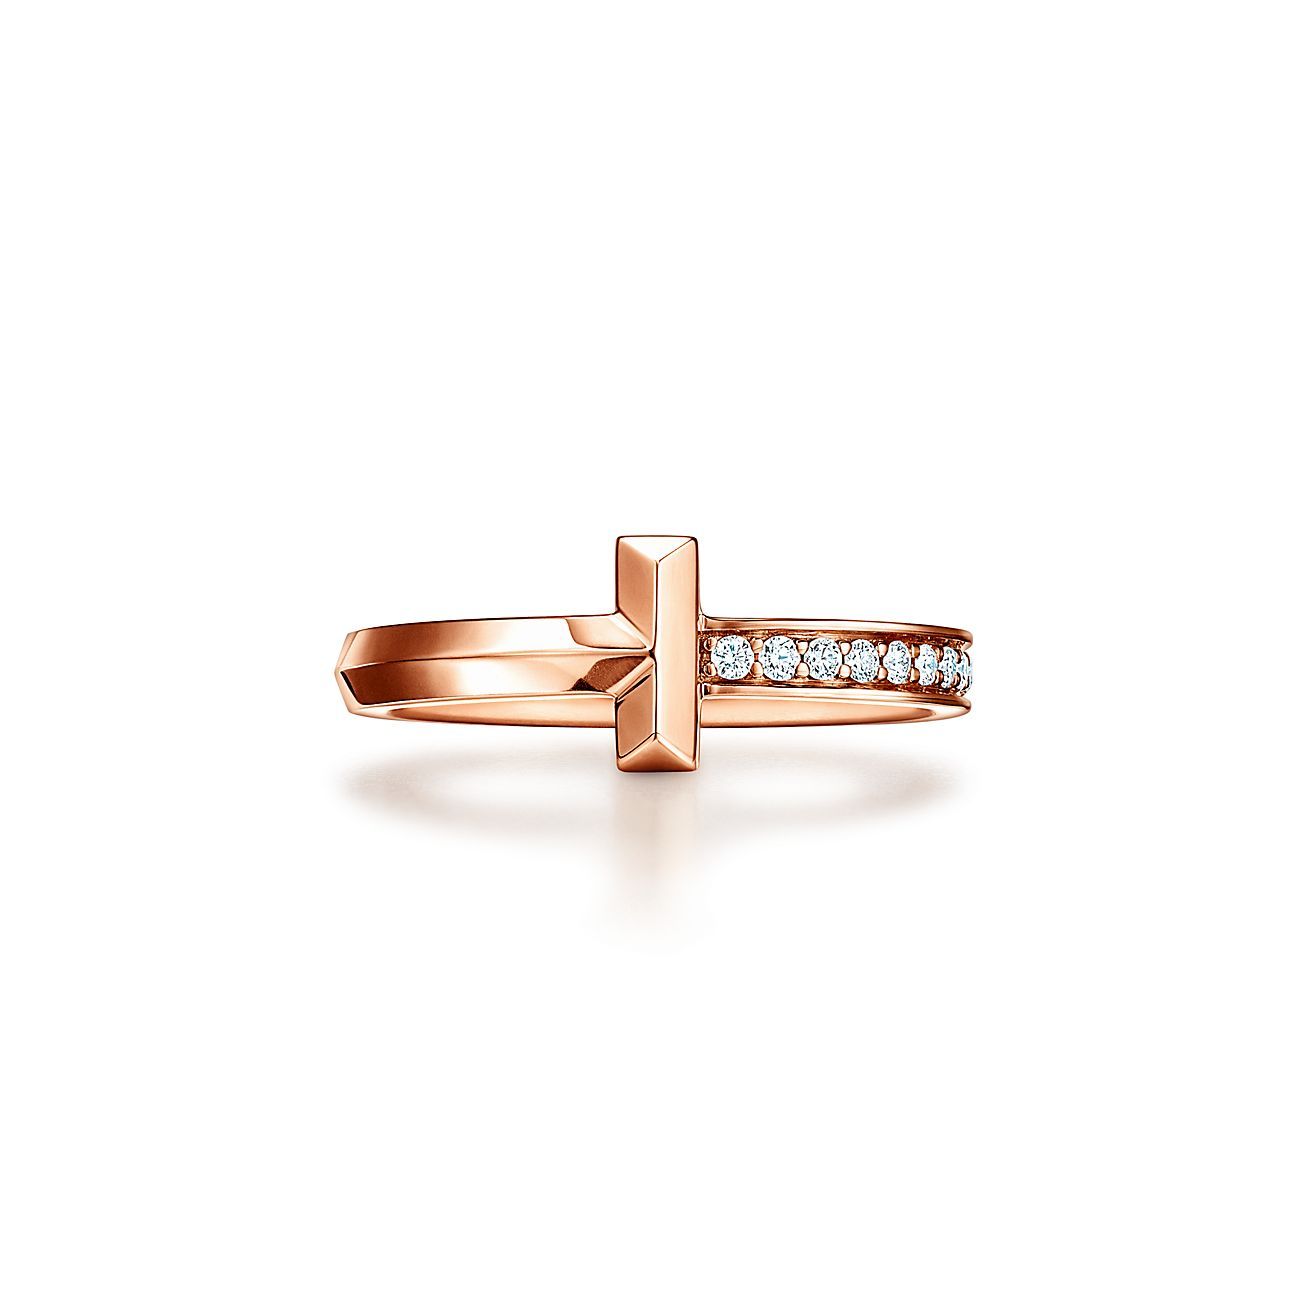 Tiffany T T1 Ring in Rose Gold with Diamonds, 2.5 mm | Tiffany & Co. | Tiffany & Co. (UK)